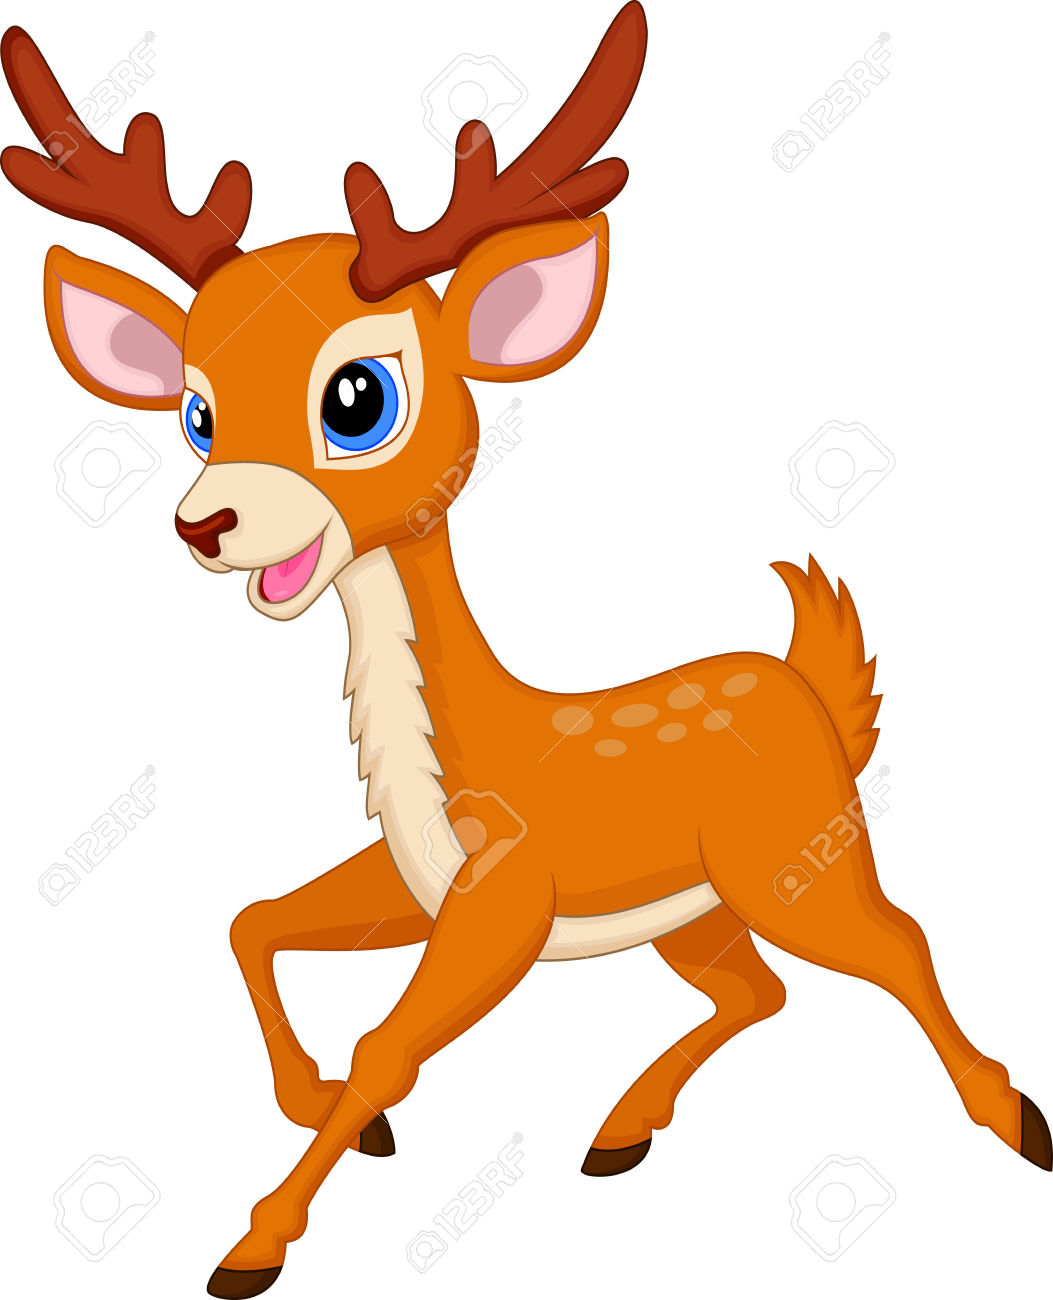 Deer Clipart to you